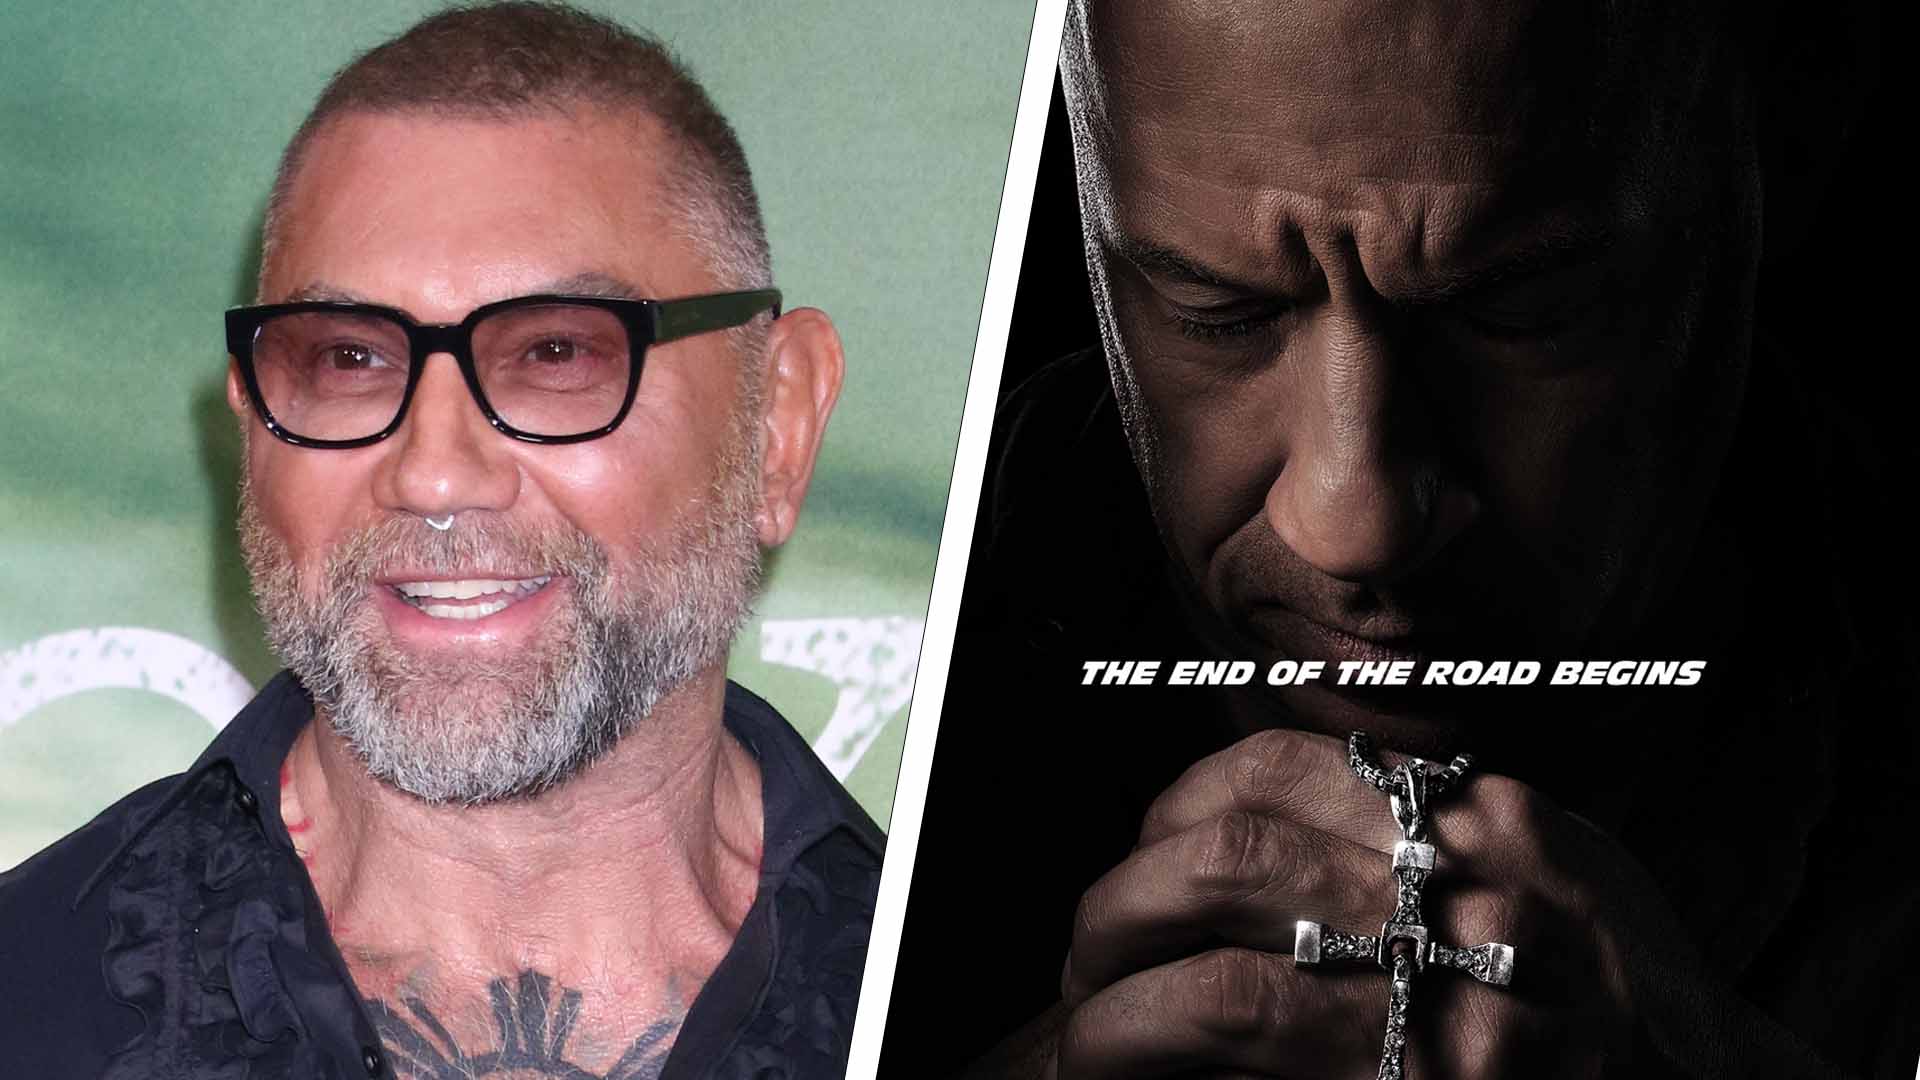 Dave Bautista Is Not A Big Fan Of The 'Fast And Furious' Films